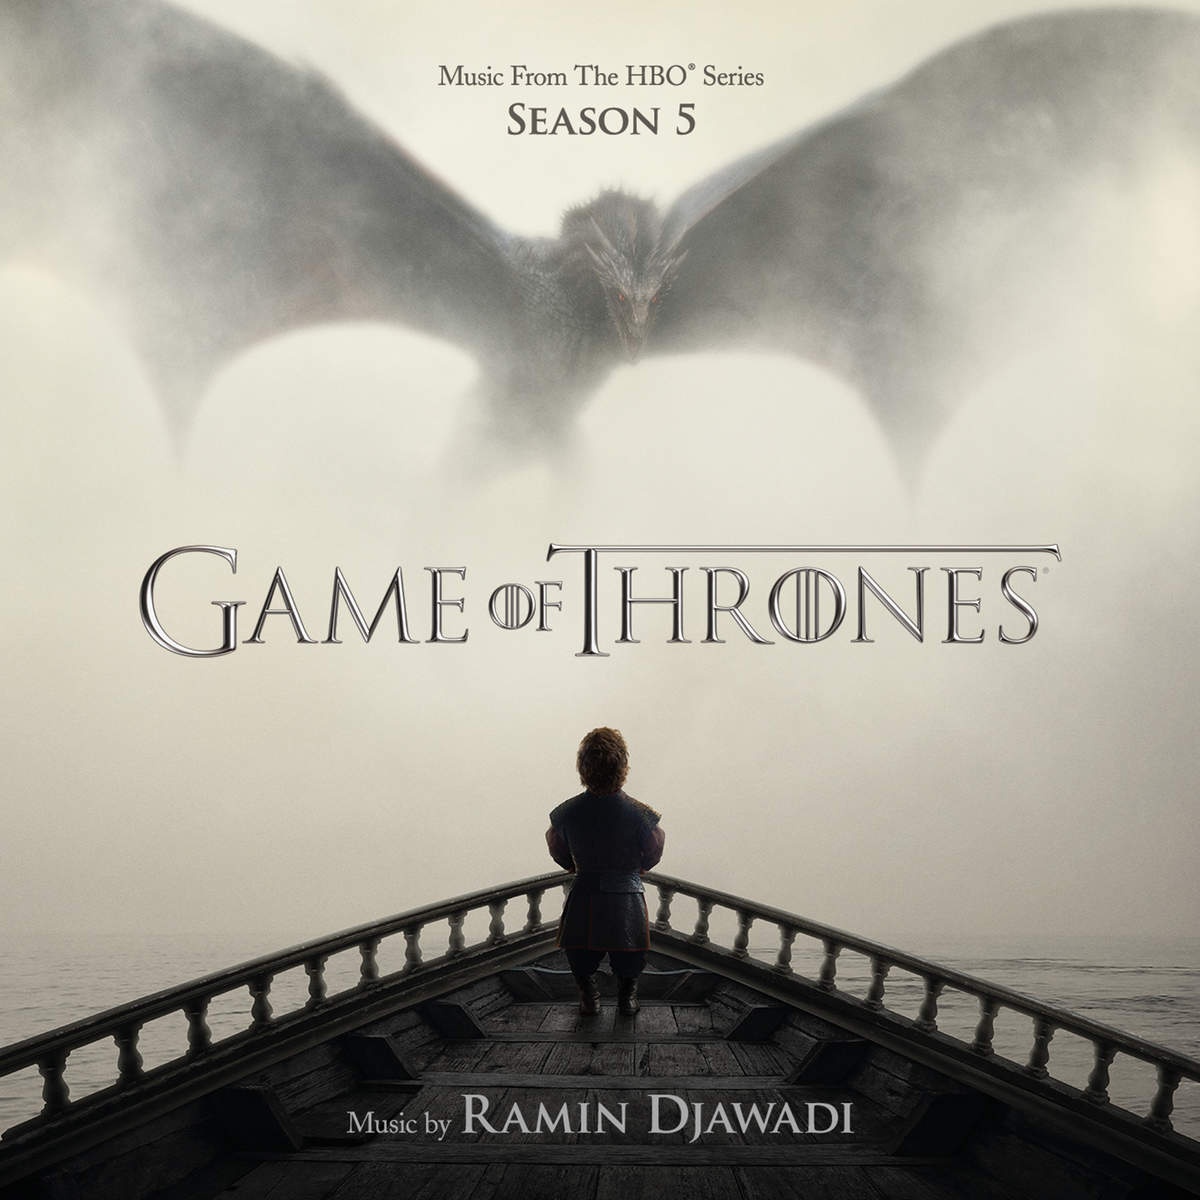 Game Of Thrones: Season 5 Music From the HBO Series